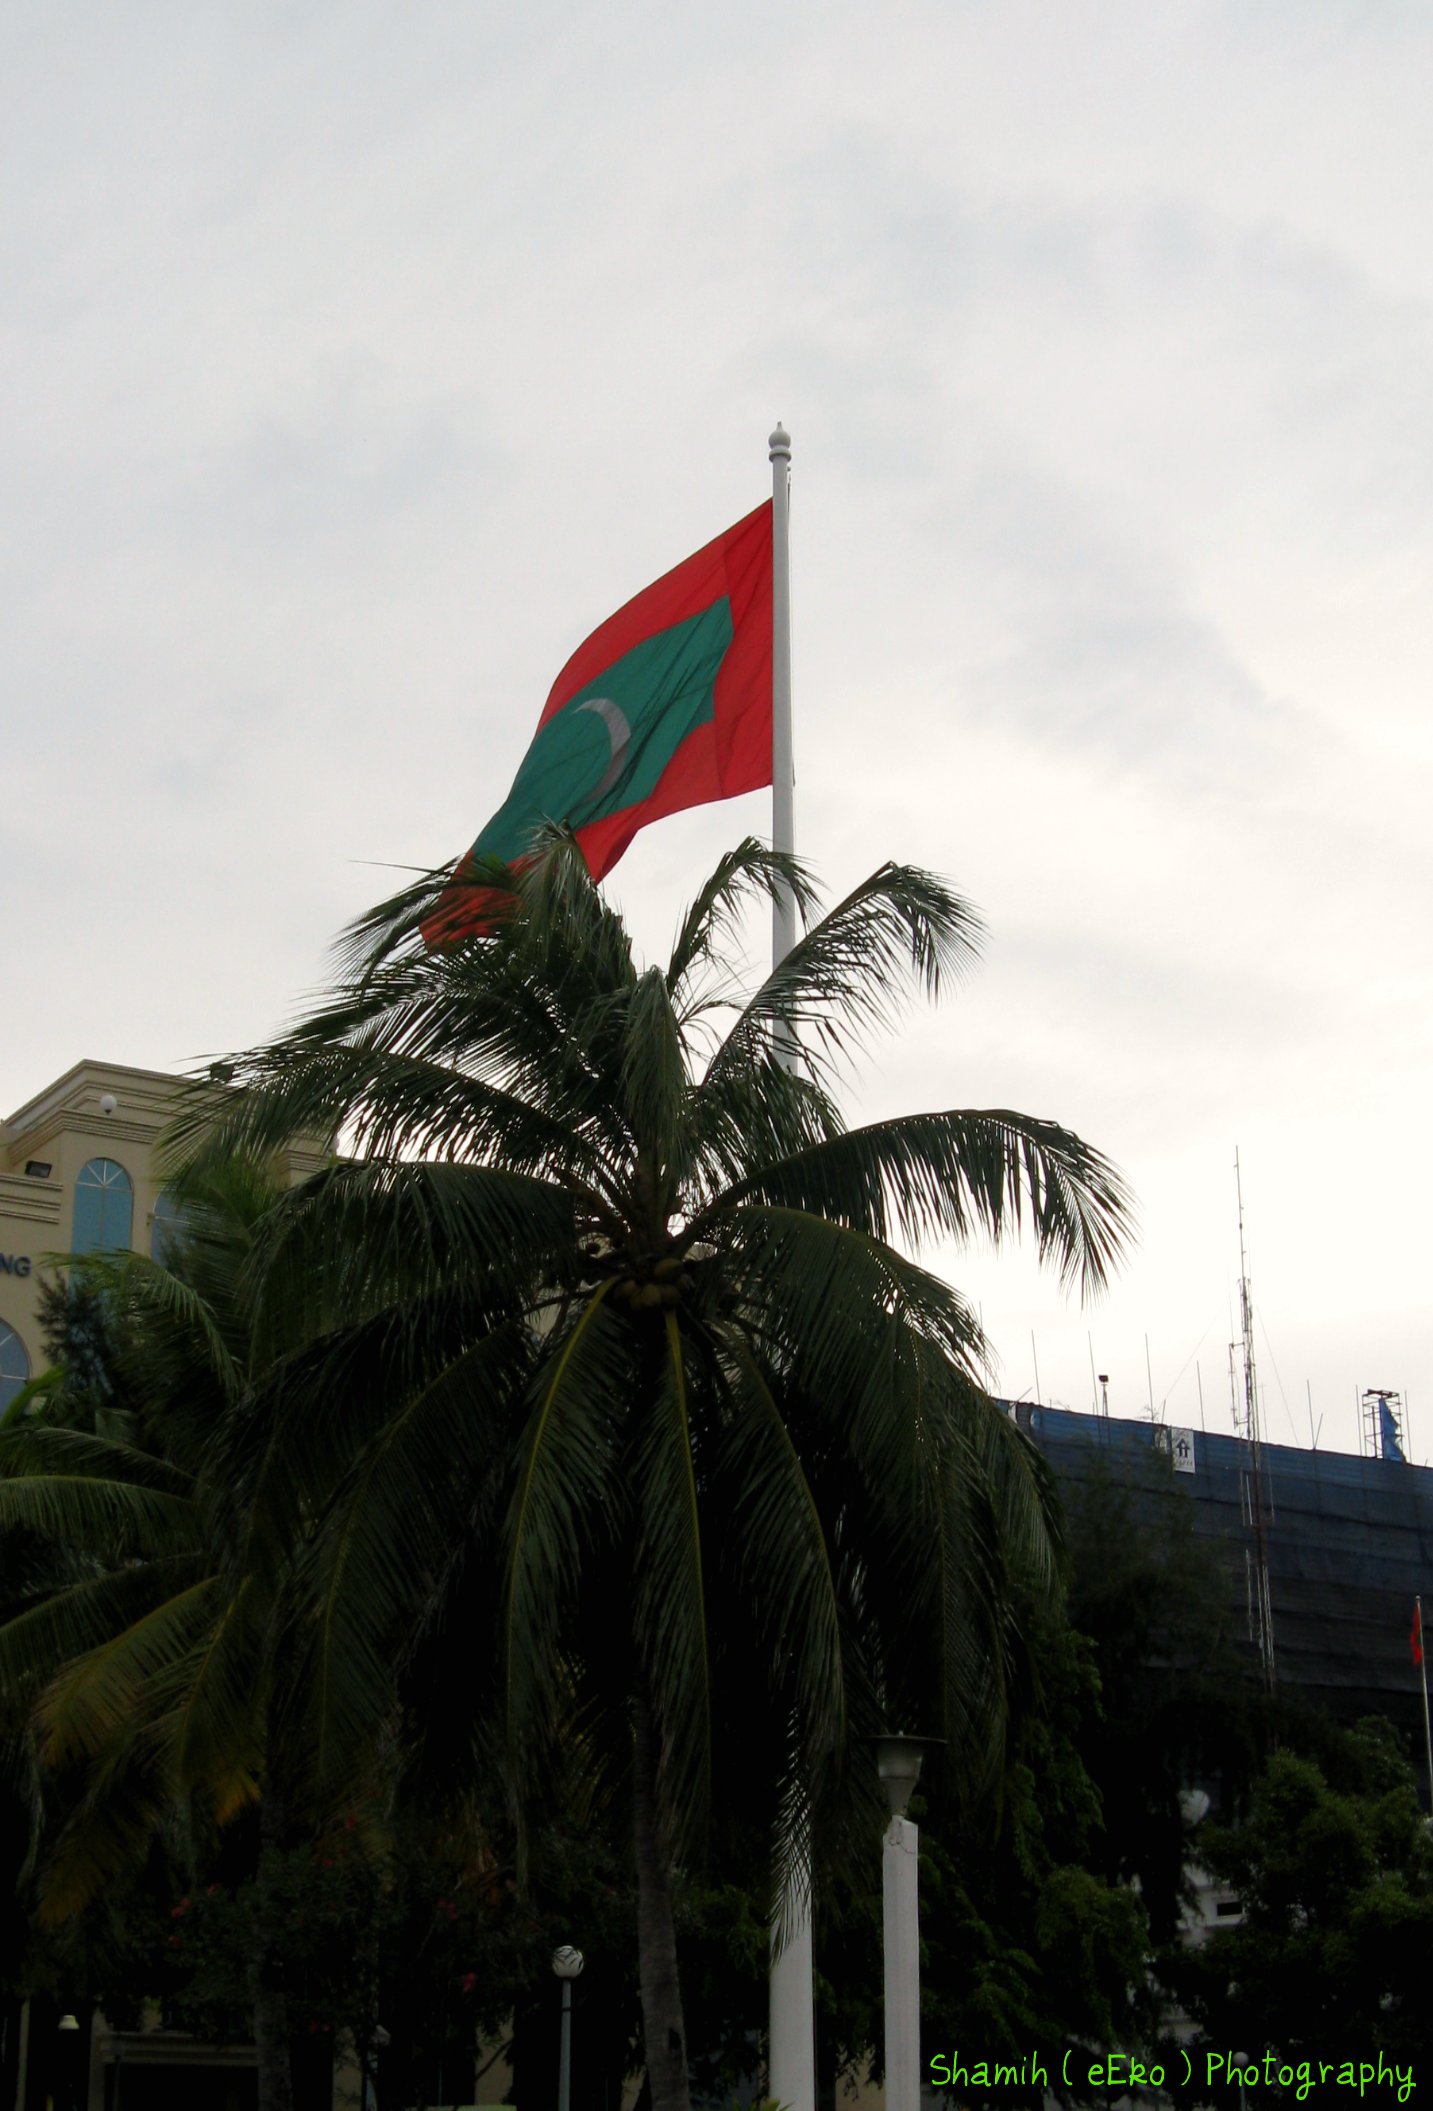 a building with trees and a large red and green flag